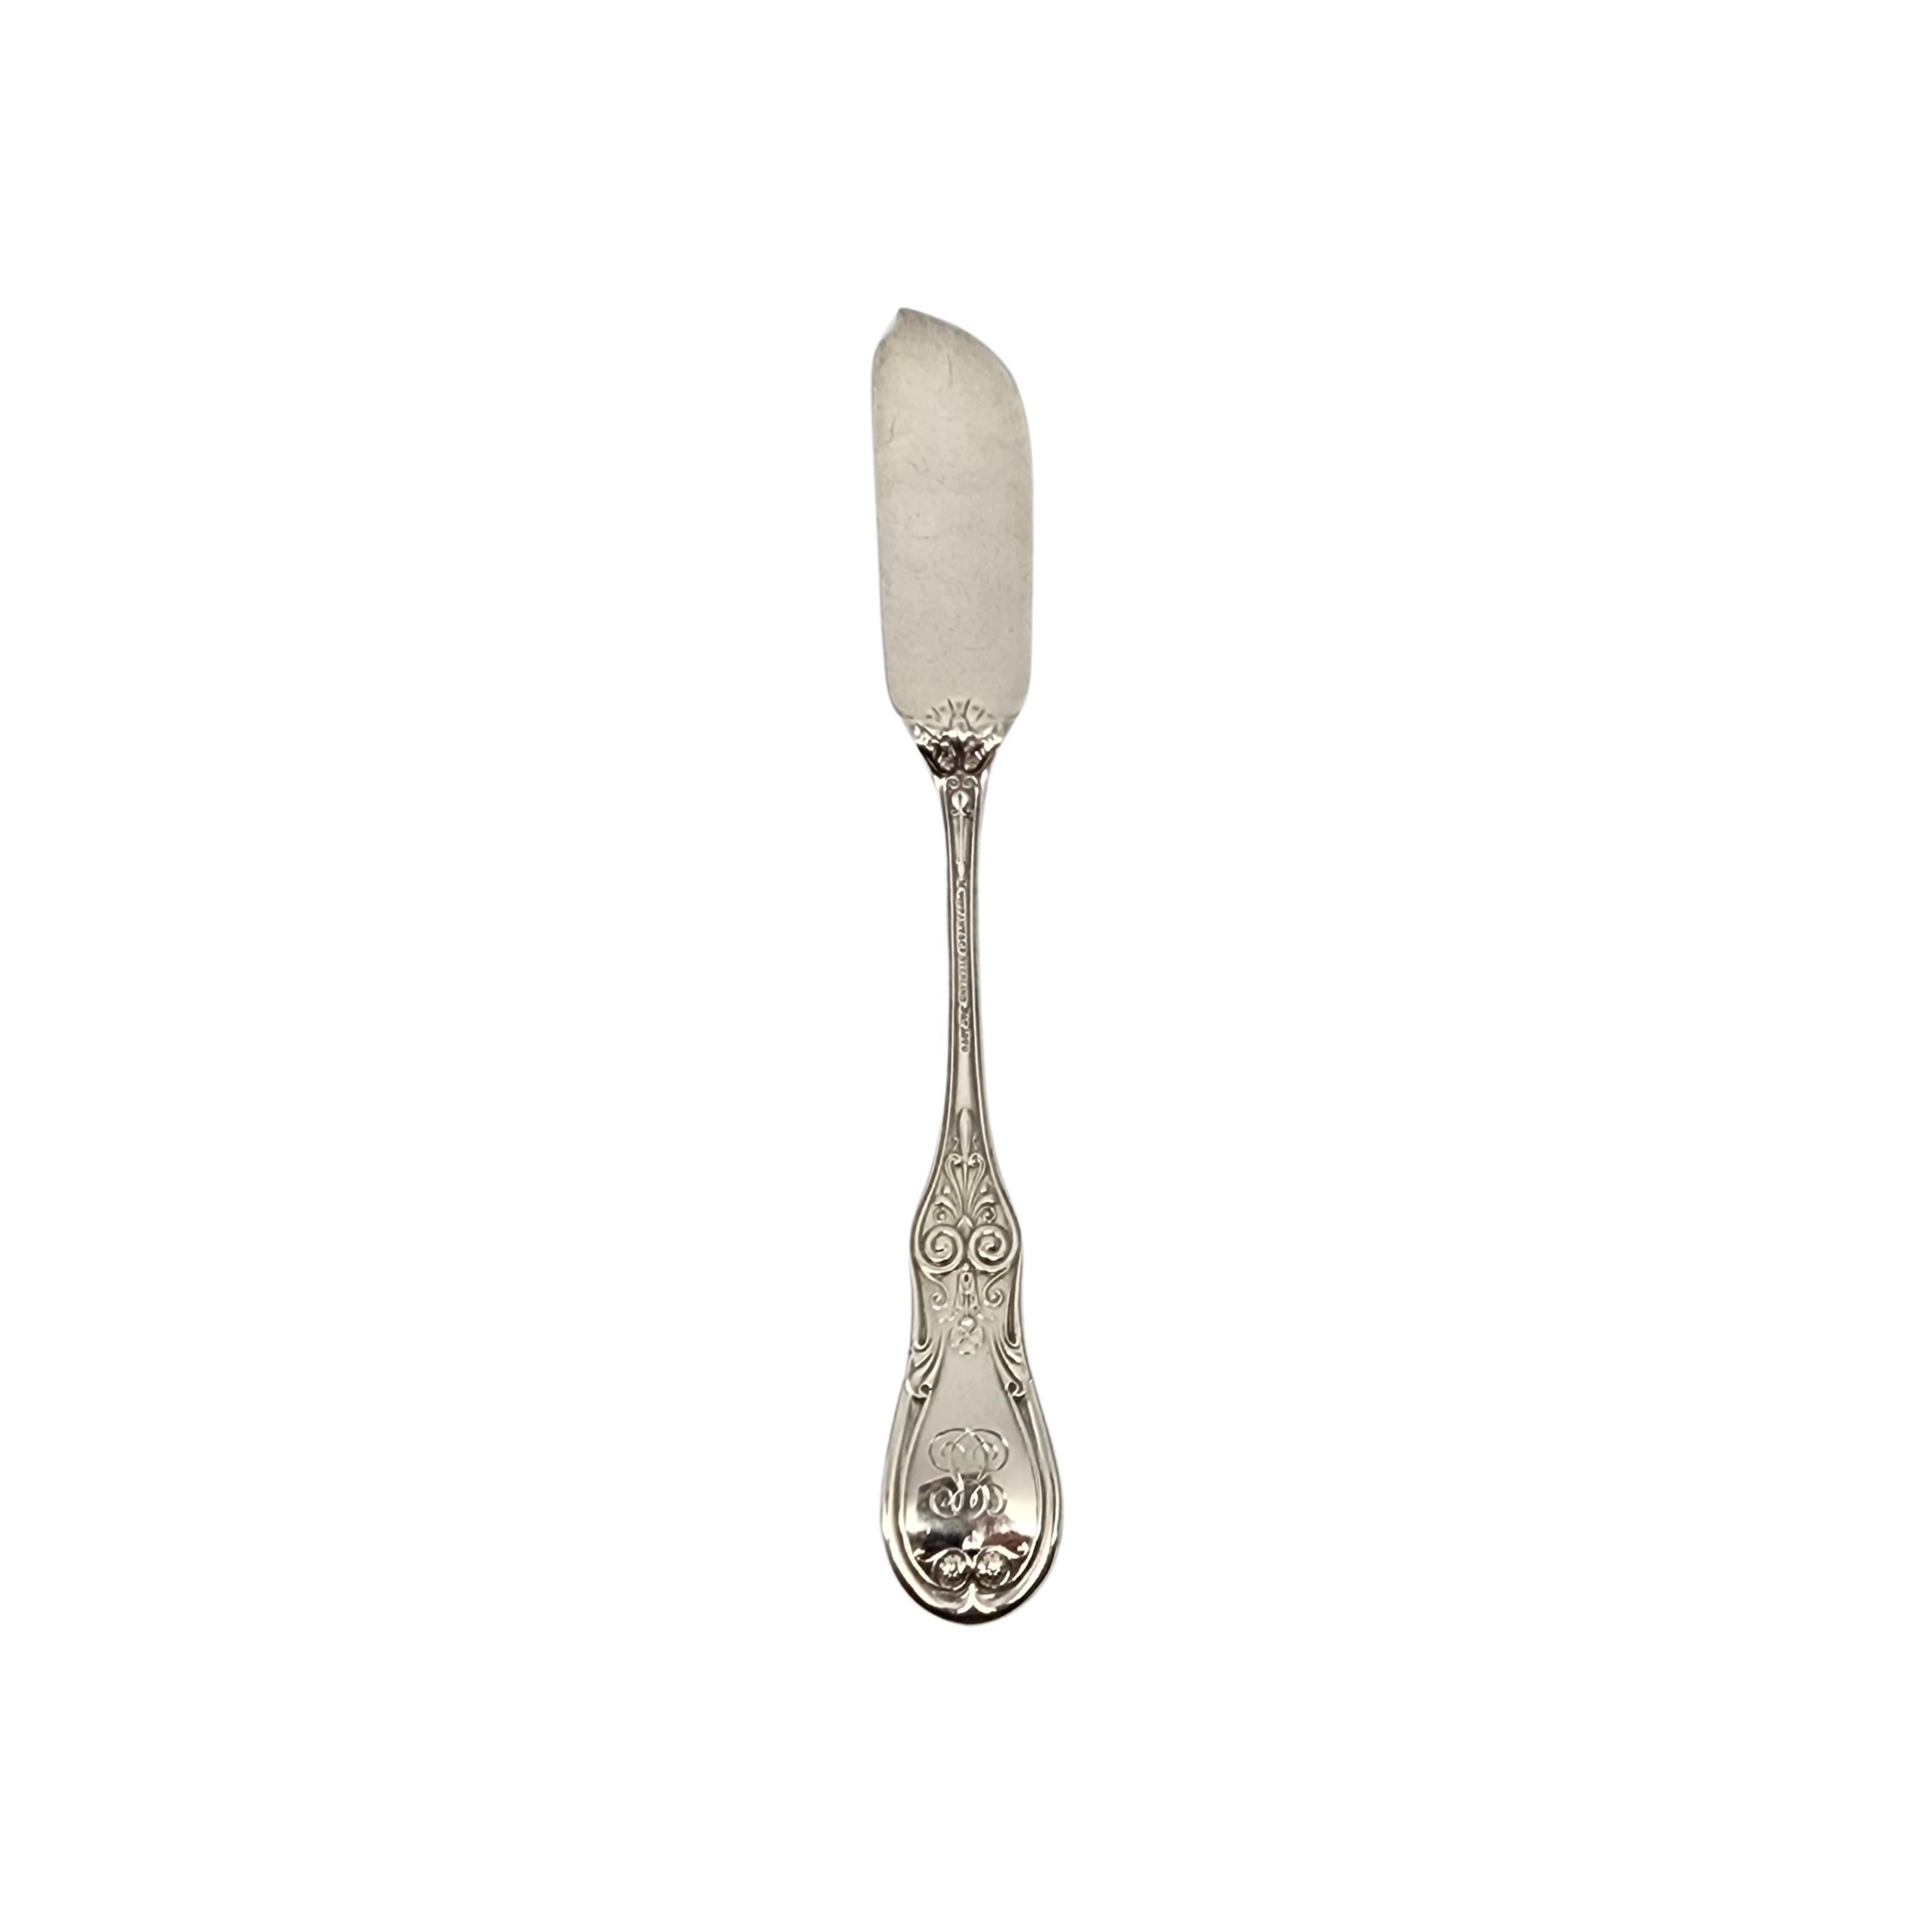 Sterling silver brite cut master butter knife by Tiffany & Co in the Saratoga/Cook/Kings pattern with monogram.

Monogram appears to be ES (on the  back of the handle).

This pattern was designed by Edward C Moore and was first introduced as Kings